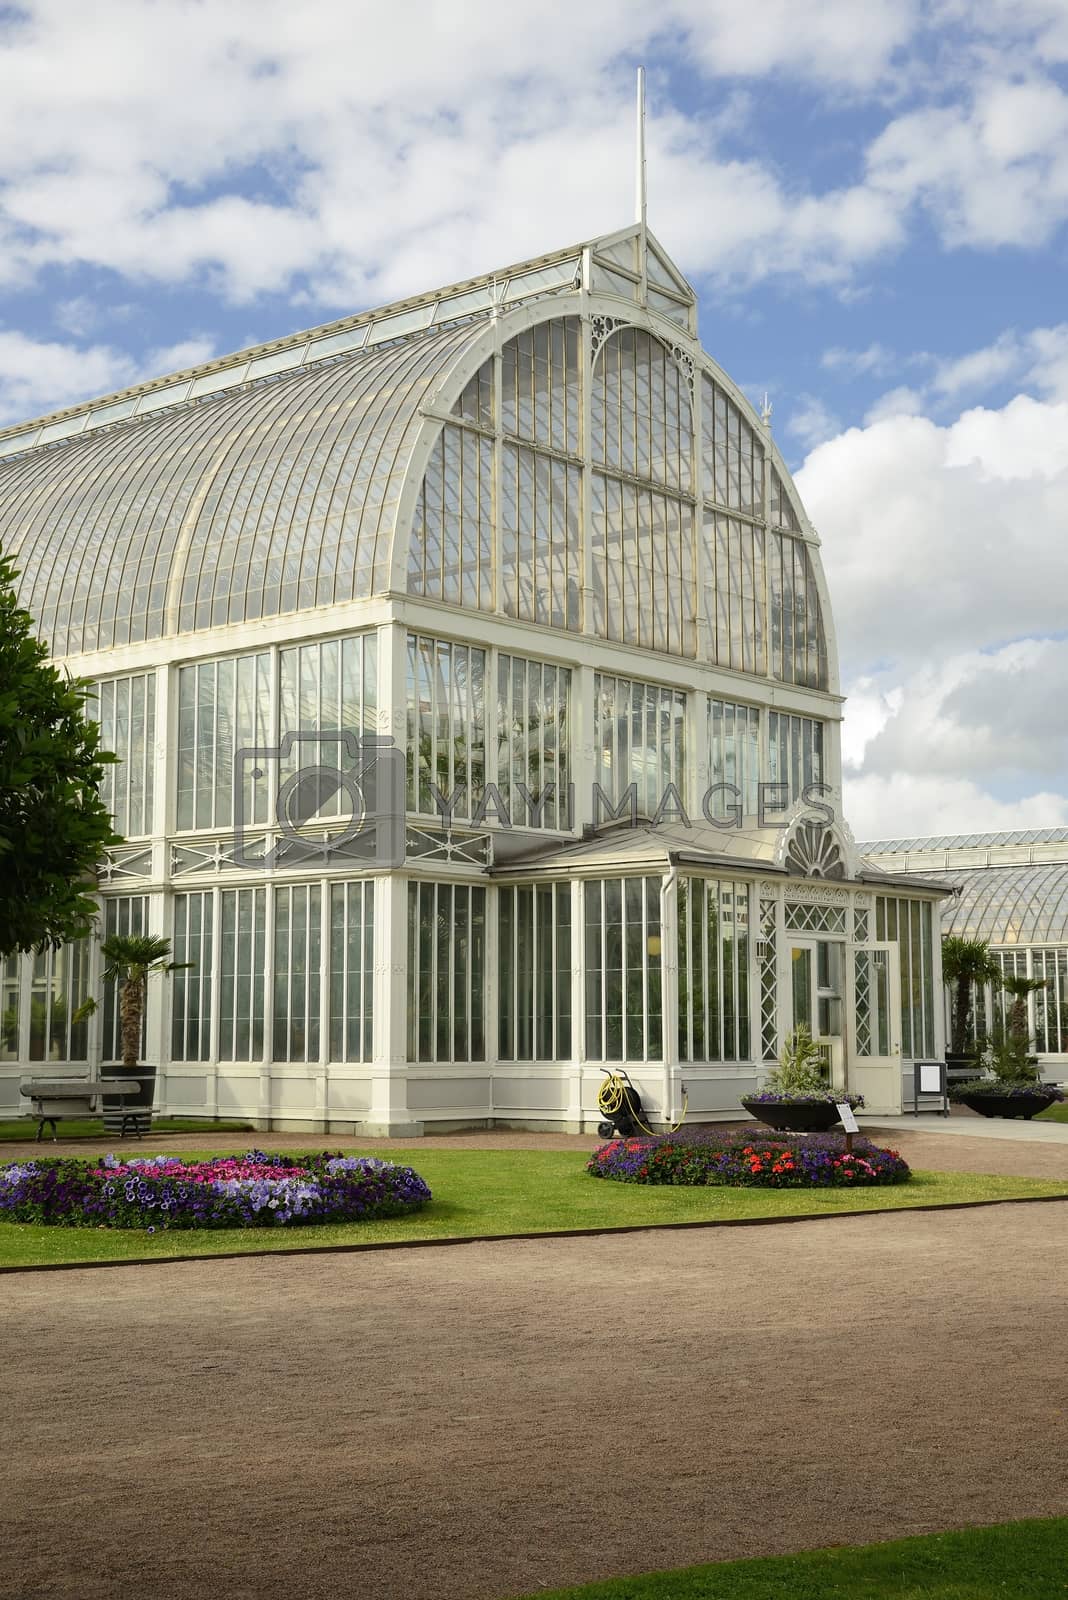 Royalty free image of Palm House by a40757